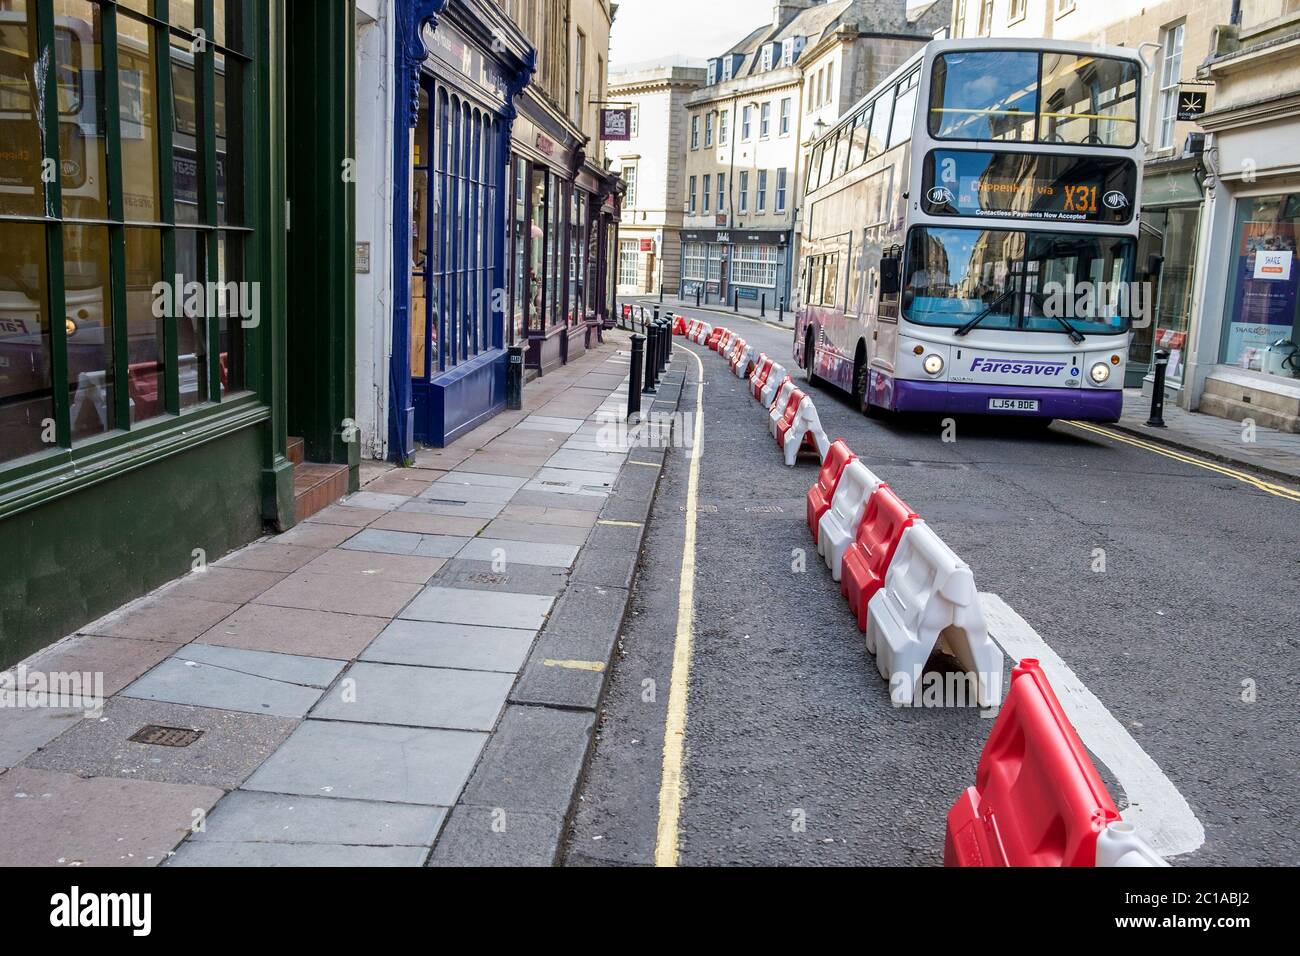 Bath, UK. 15th June, 2020. As non essential shops in England are given the green light by the government to reopen, street barriers put in place by the local council to widen the pavements in order to help with social distancing are pictured in Broad street. Credit: Lynchpics/Alamy Live News Stock Photo